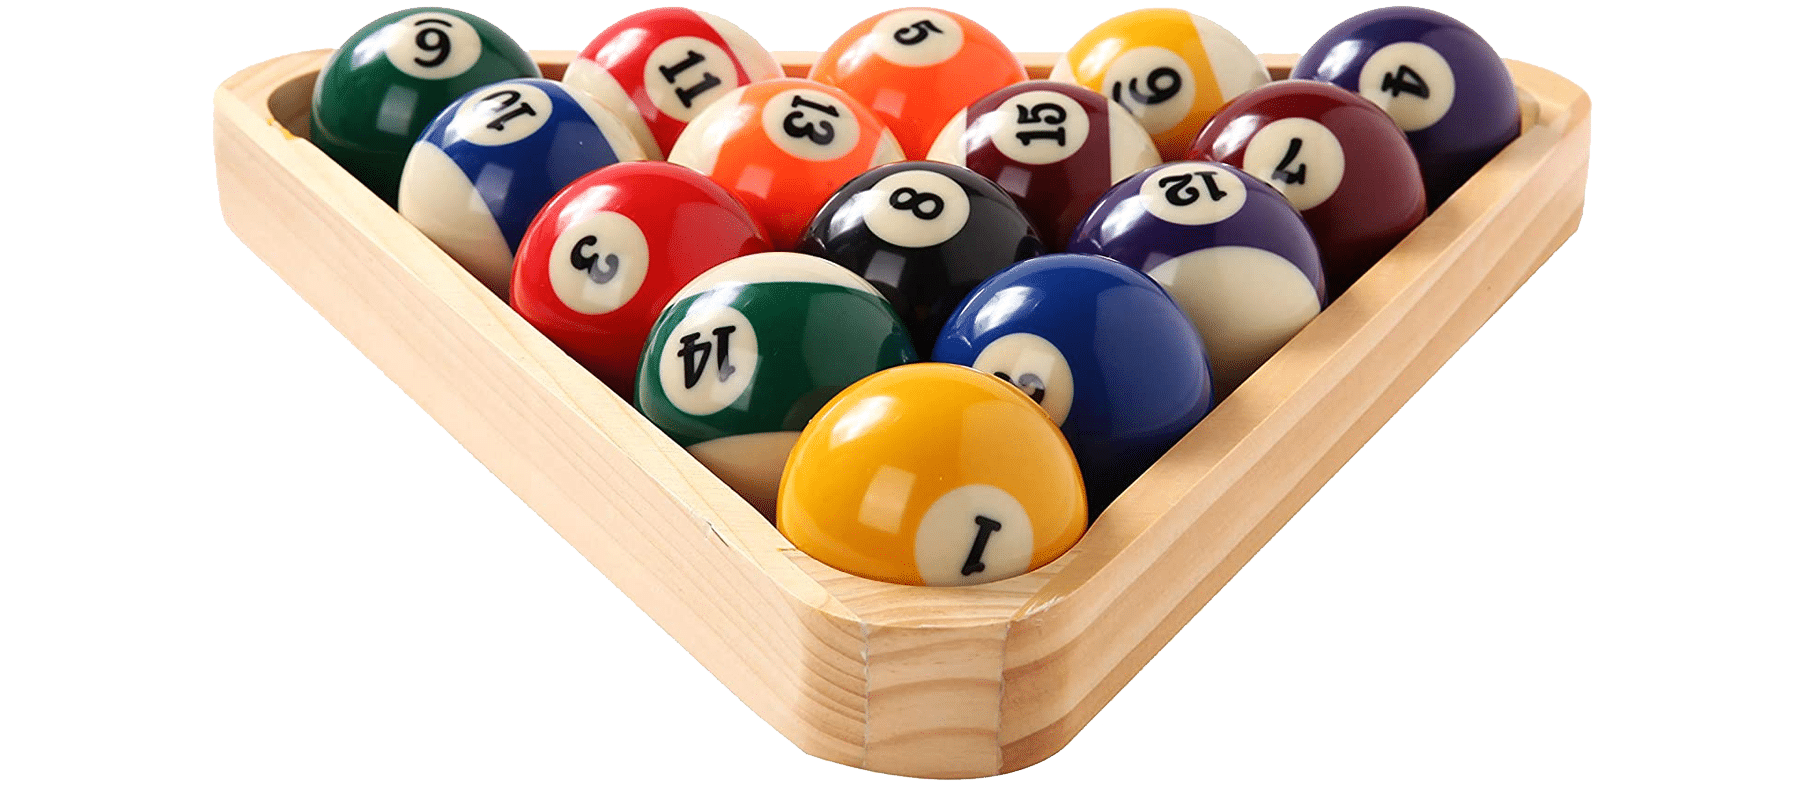 Pool Tournaments 8 Ball, 9 Ball and 10 Ball Pool Tournaments in LA